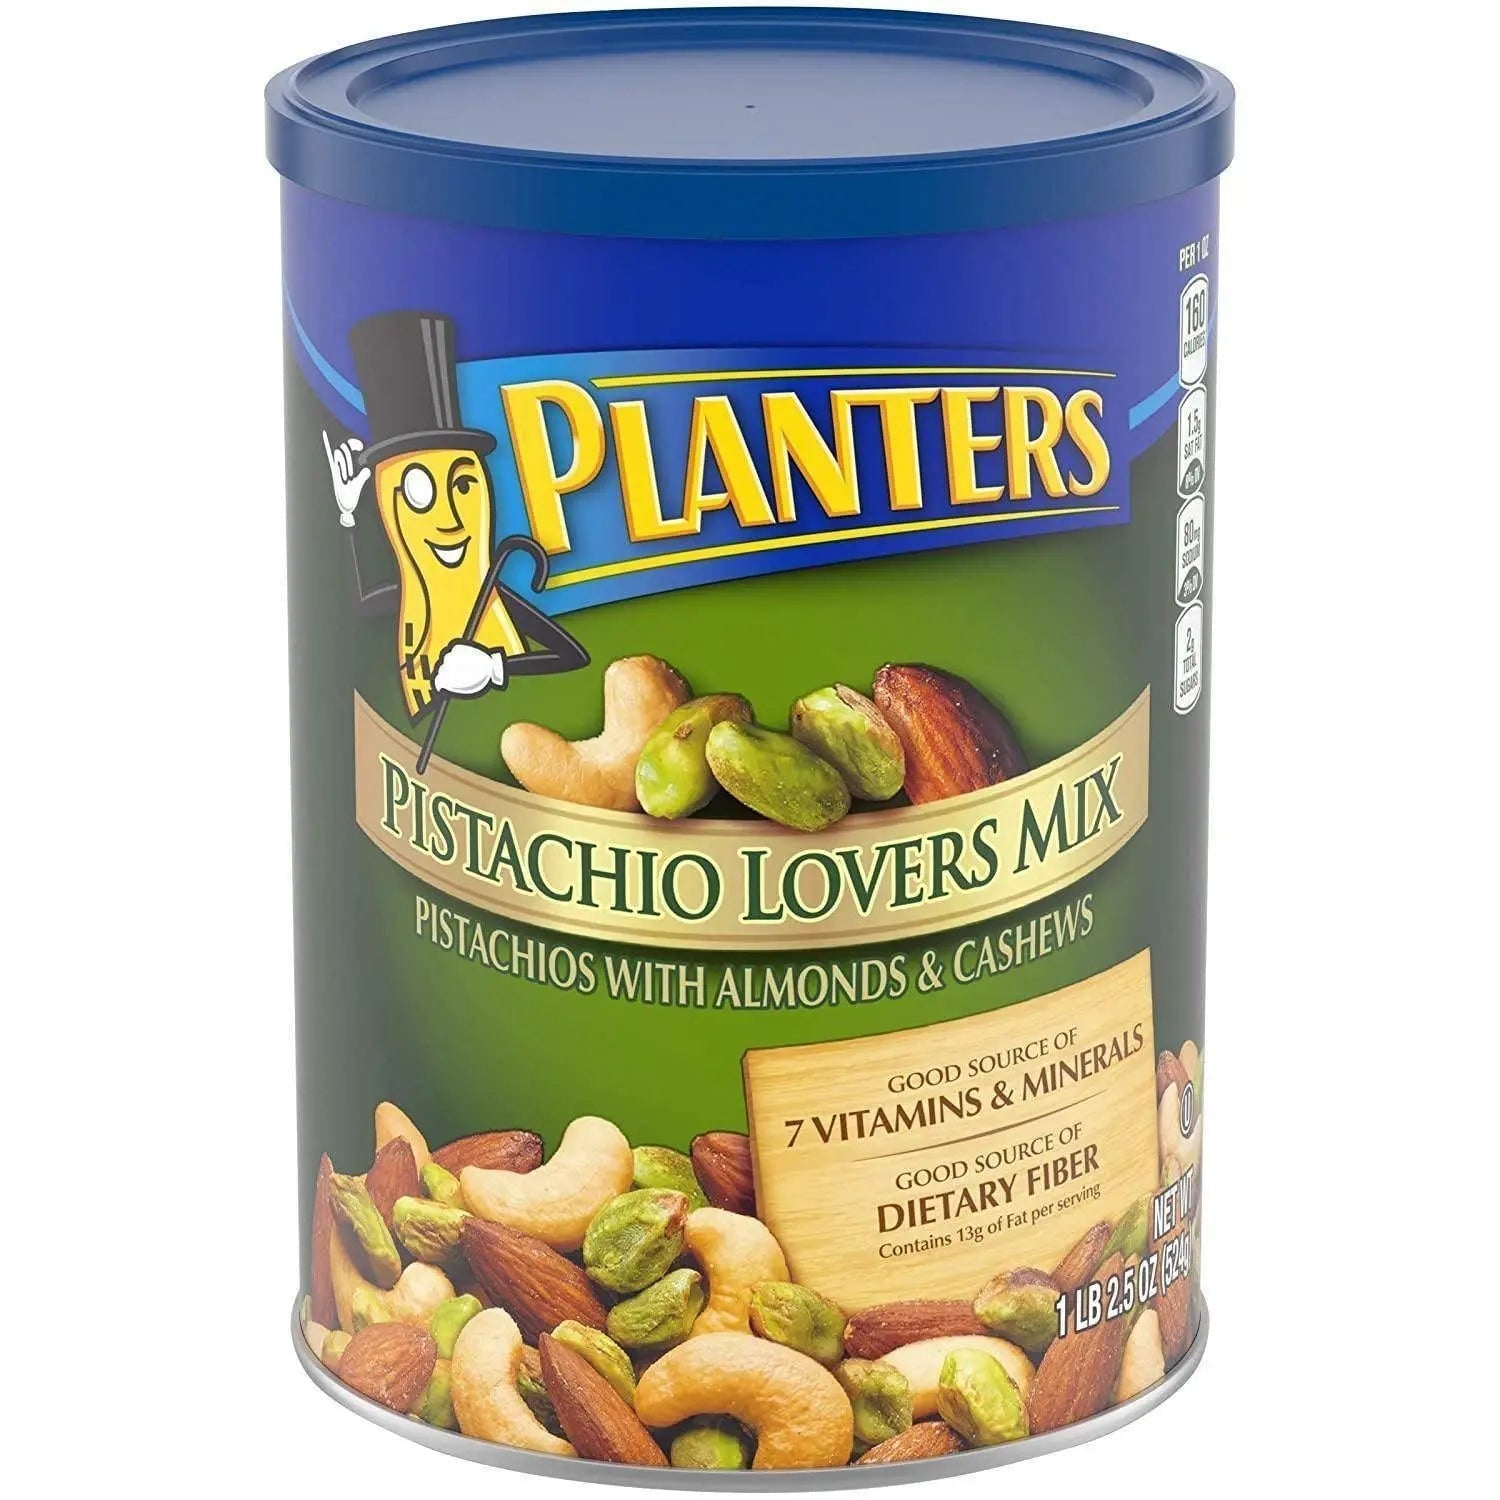 Wholesale prices with free shipping all over United States Planters Pistachio Lovers Nut Mix - Steven Deals